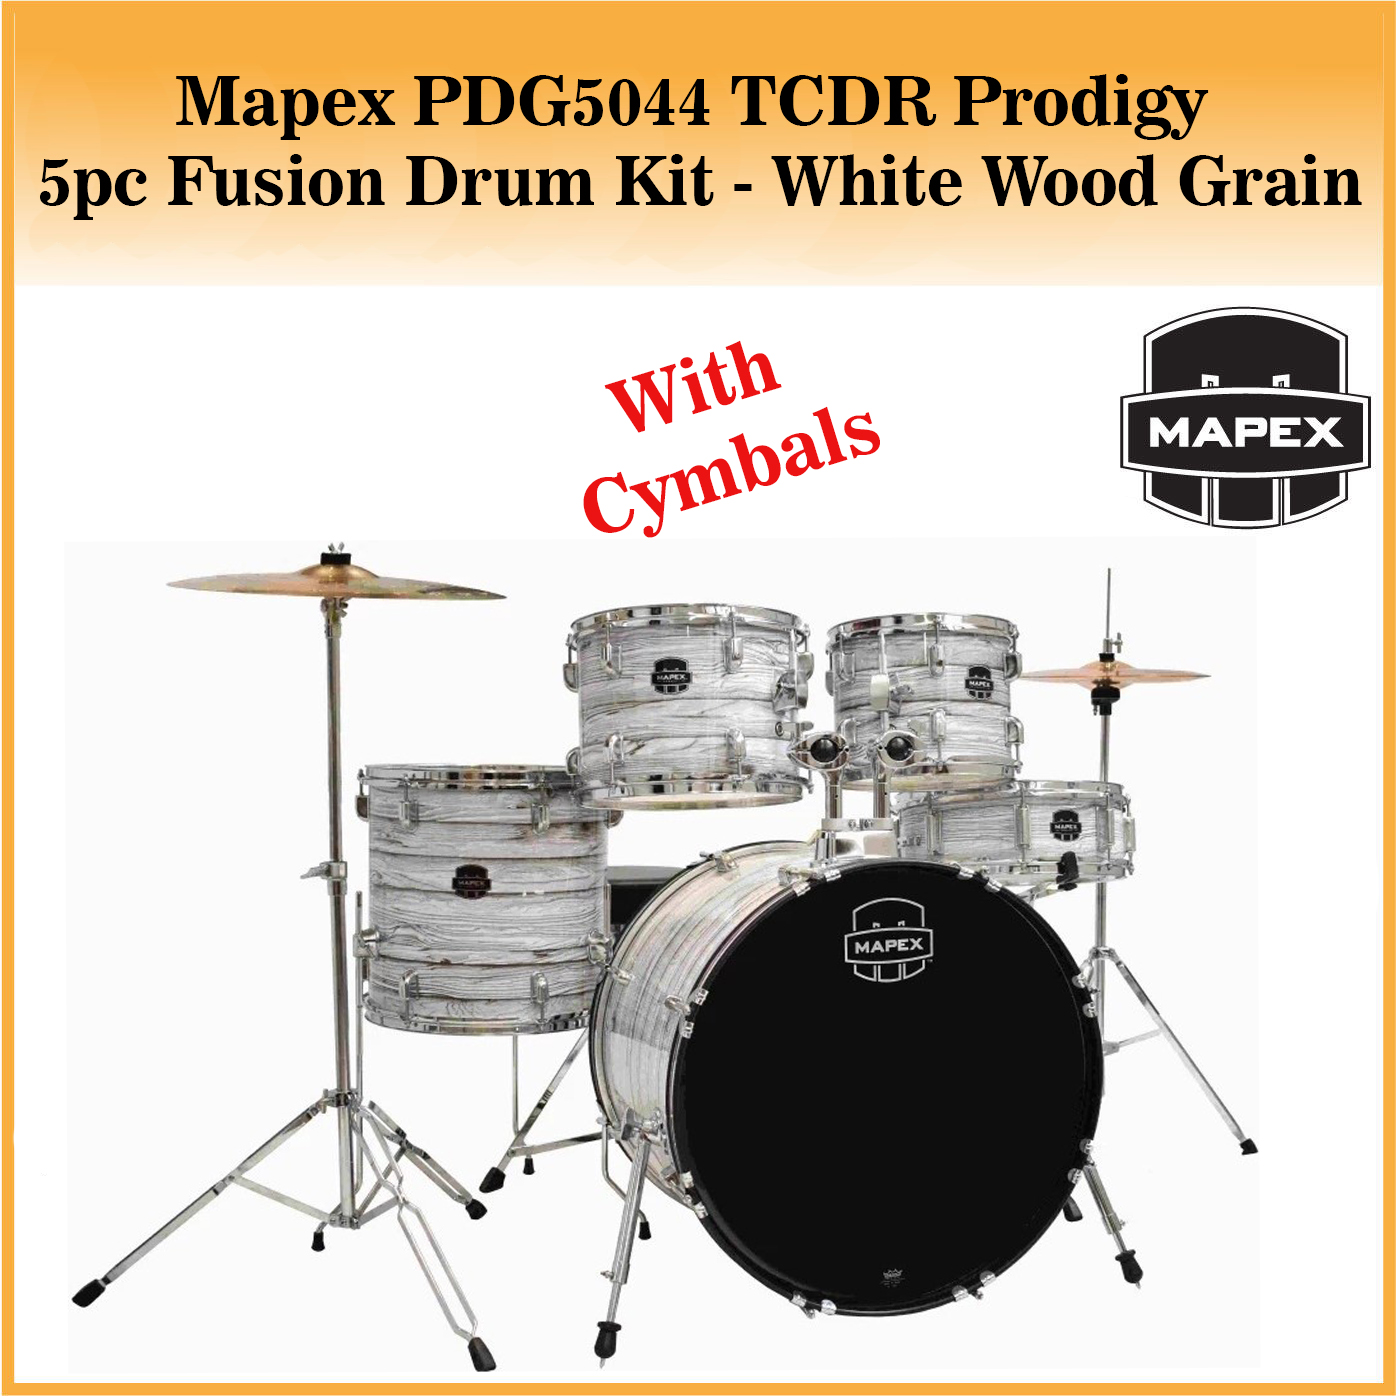 Mapex PDG5044 TCFI Prodigy 5 Pieces Fusion Drum Kit White Wood Grain Including Throne and Cymbals